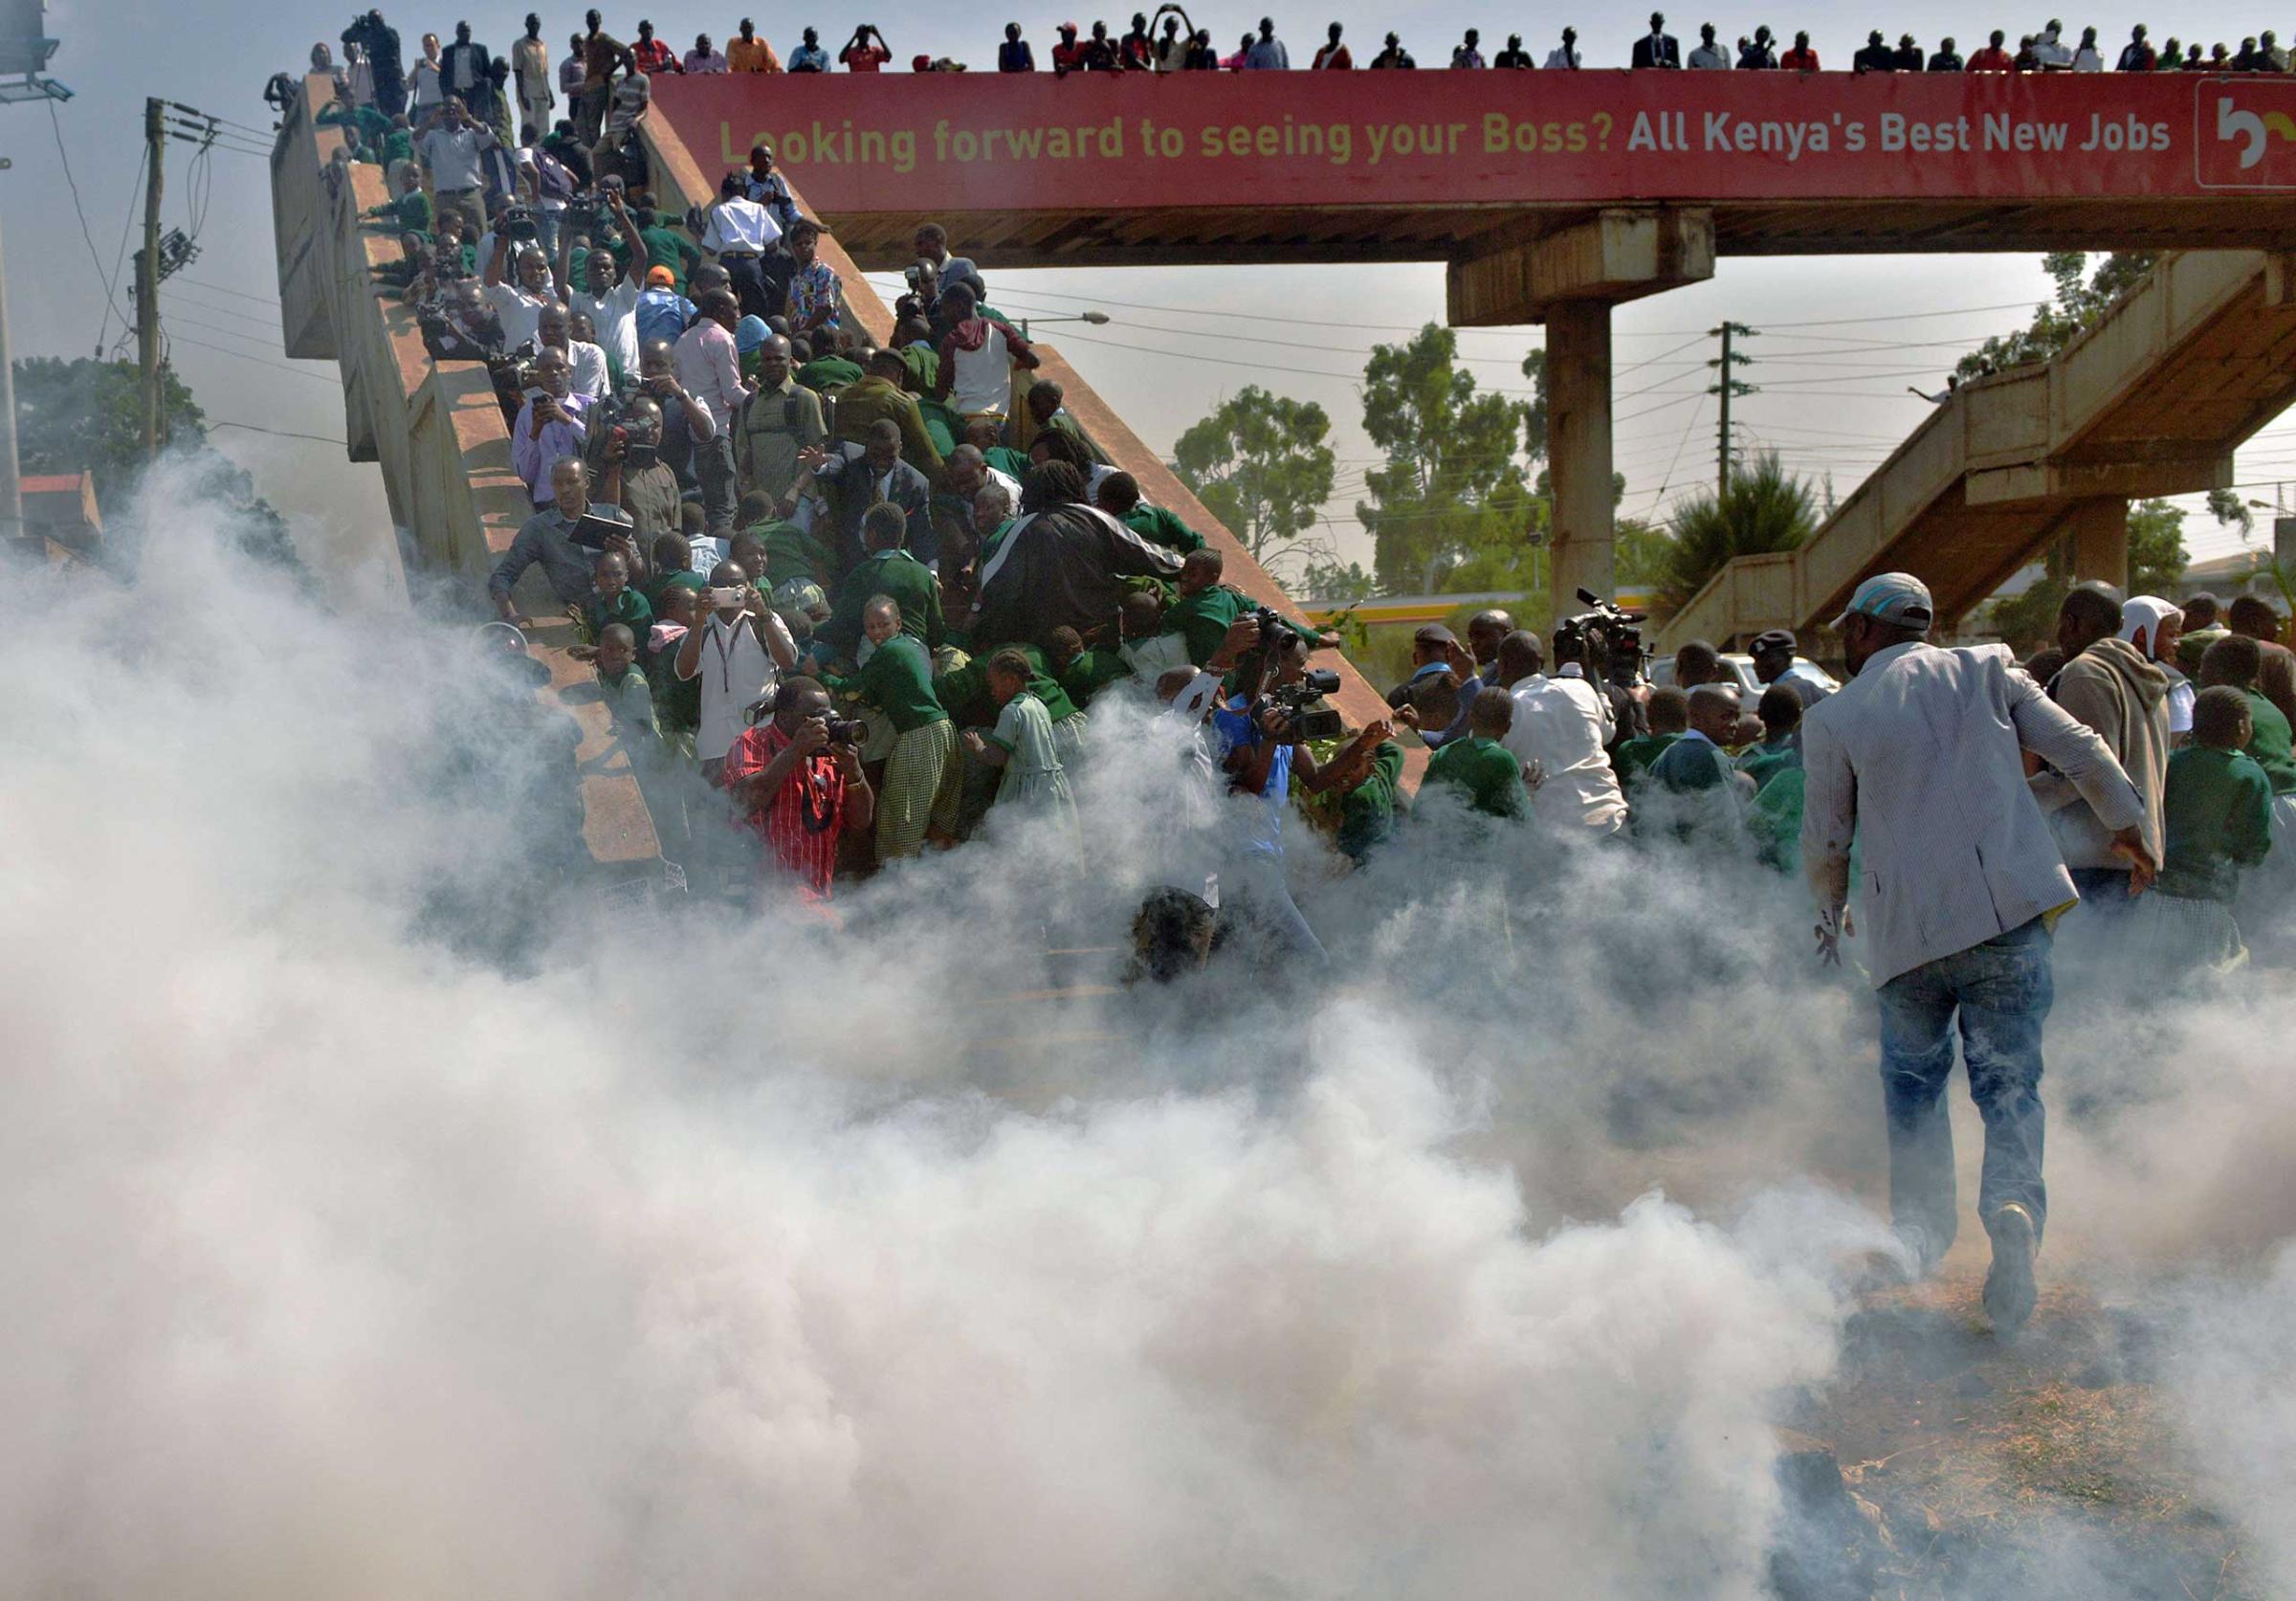 School children from the Lang'ata road primary school scramble up a bridge on Jan. 19, 2015 in Nairobi to escape tear gas.